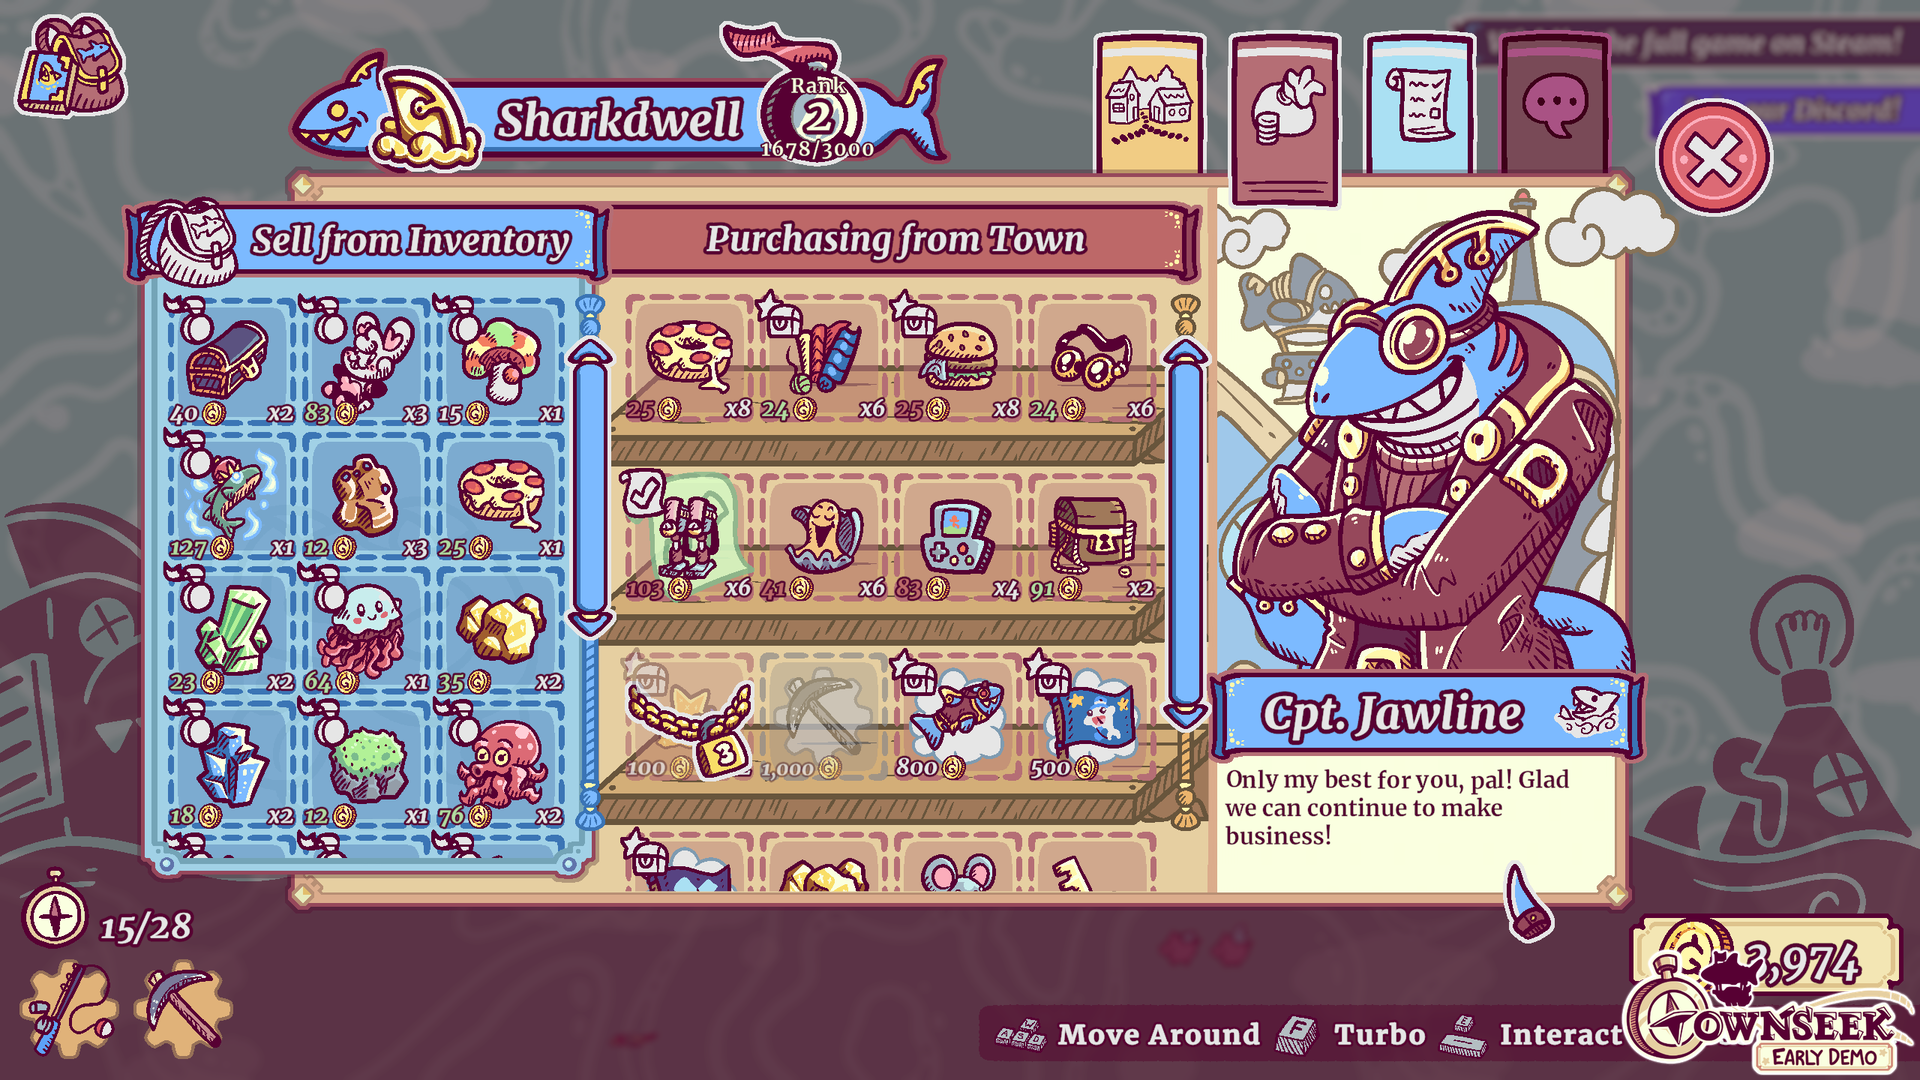 Trade with towns such as Sharkdwell to rank your reputation and unlock more items!